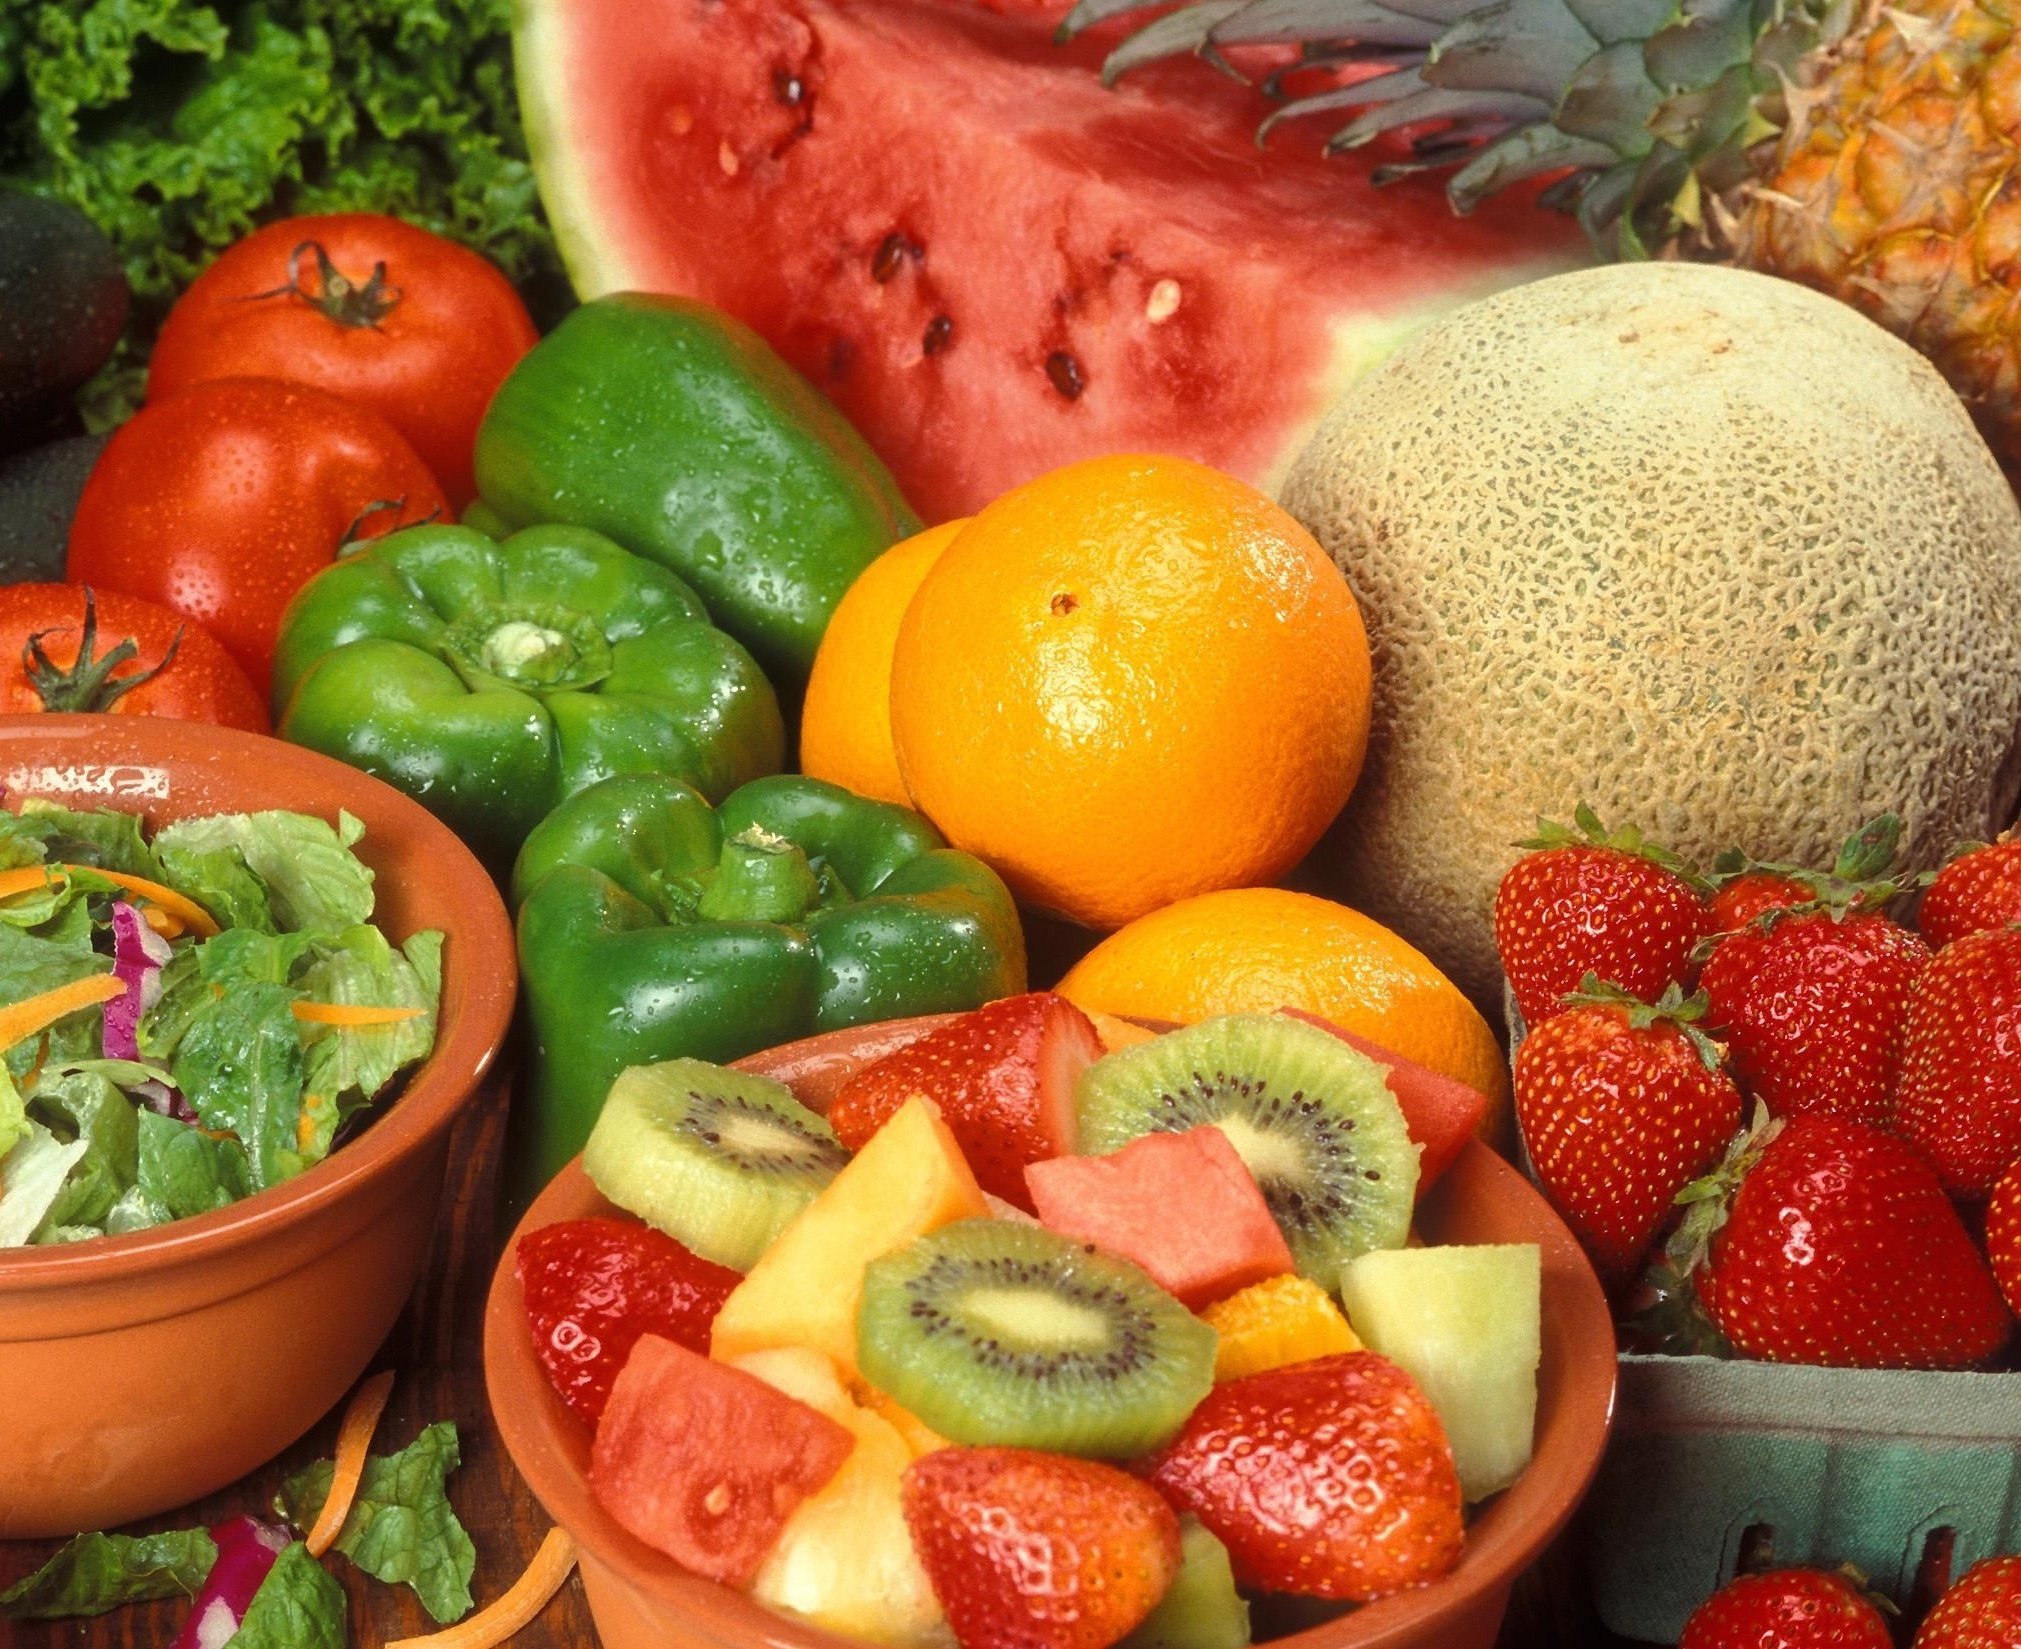 More Matters! Fruits and Veggies Help Your Body Fight Cancer